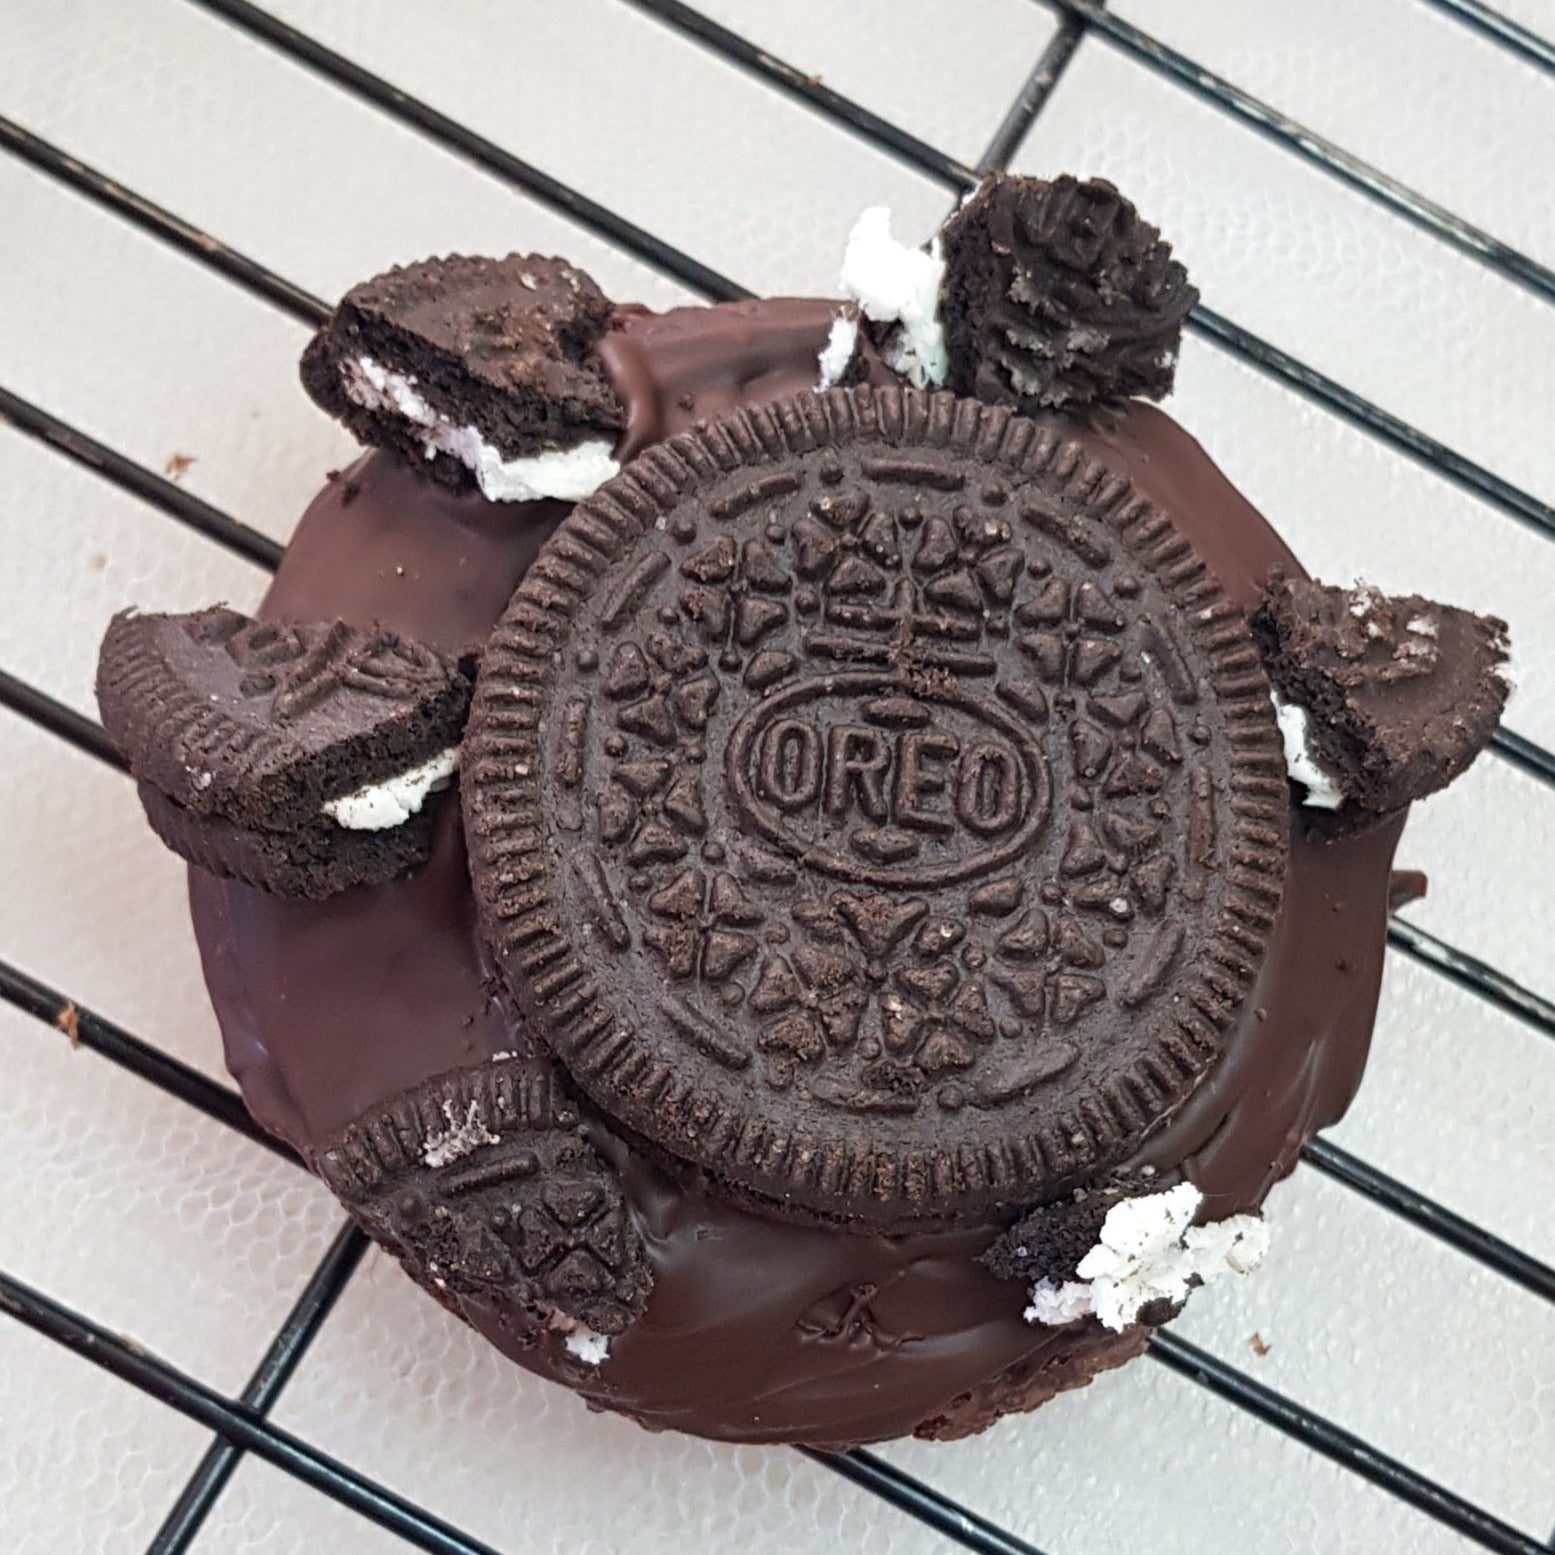 Vegan brownie bronut with Oreo topping